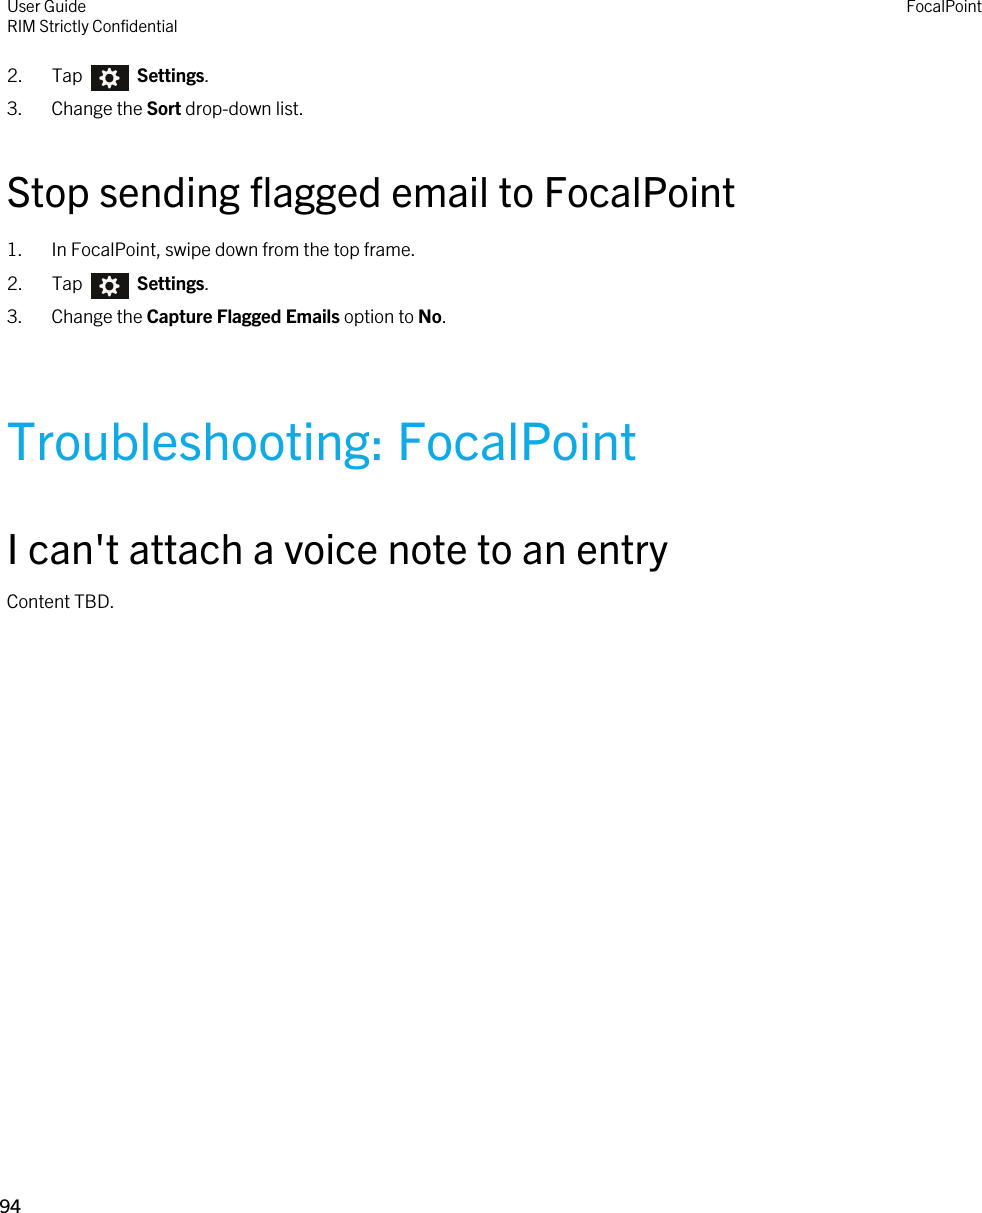 2.  Tap    Settings.3. Change the Sort drop-down list.Stop sending flagged email to FocalPoint1. In FocalPoint, swipe down from the top frame.2.  Tap    Settings.3. Change the Capture Flagged Emails option to No.Troubleshooting: FocalPointI can&apos;t attach a voice note to an entryContent TBD.User GuideRIM Strictly Confidential FocalPoint94 